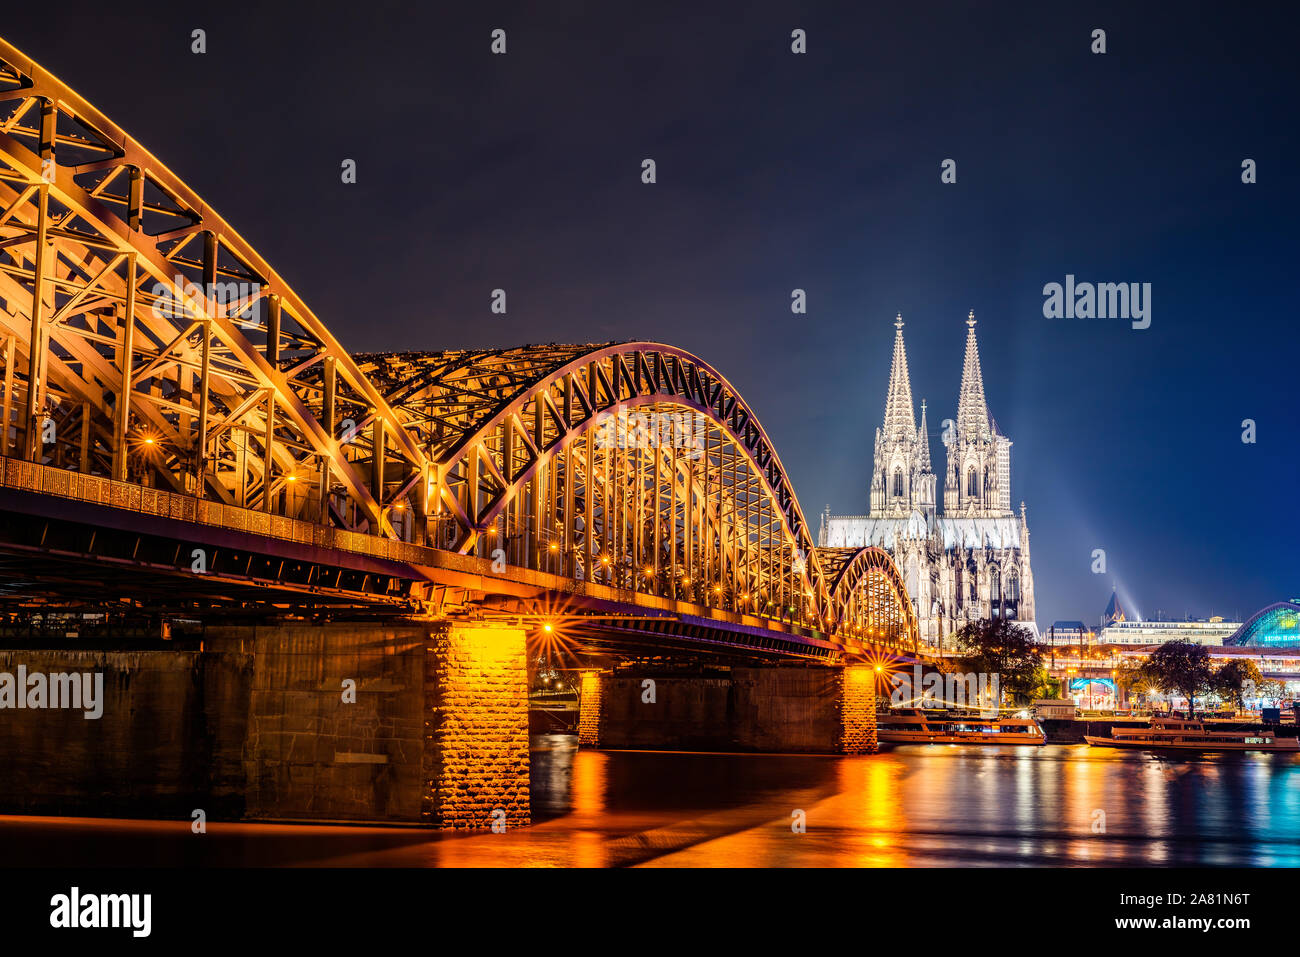 The city of Cologne at night with Cologne Cathedral, Hohenzollern Bridge and Rhine river Stock Photo